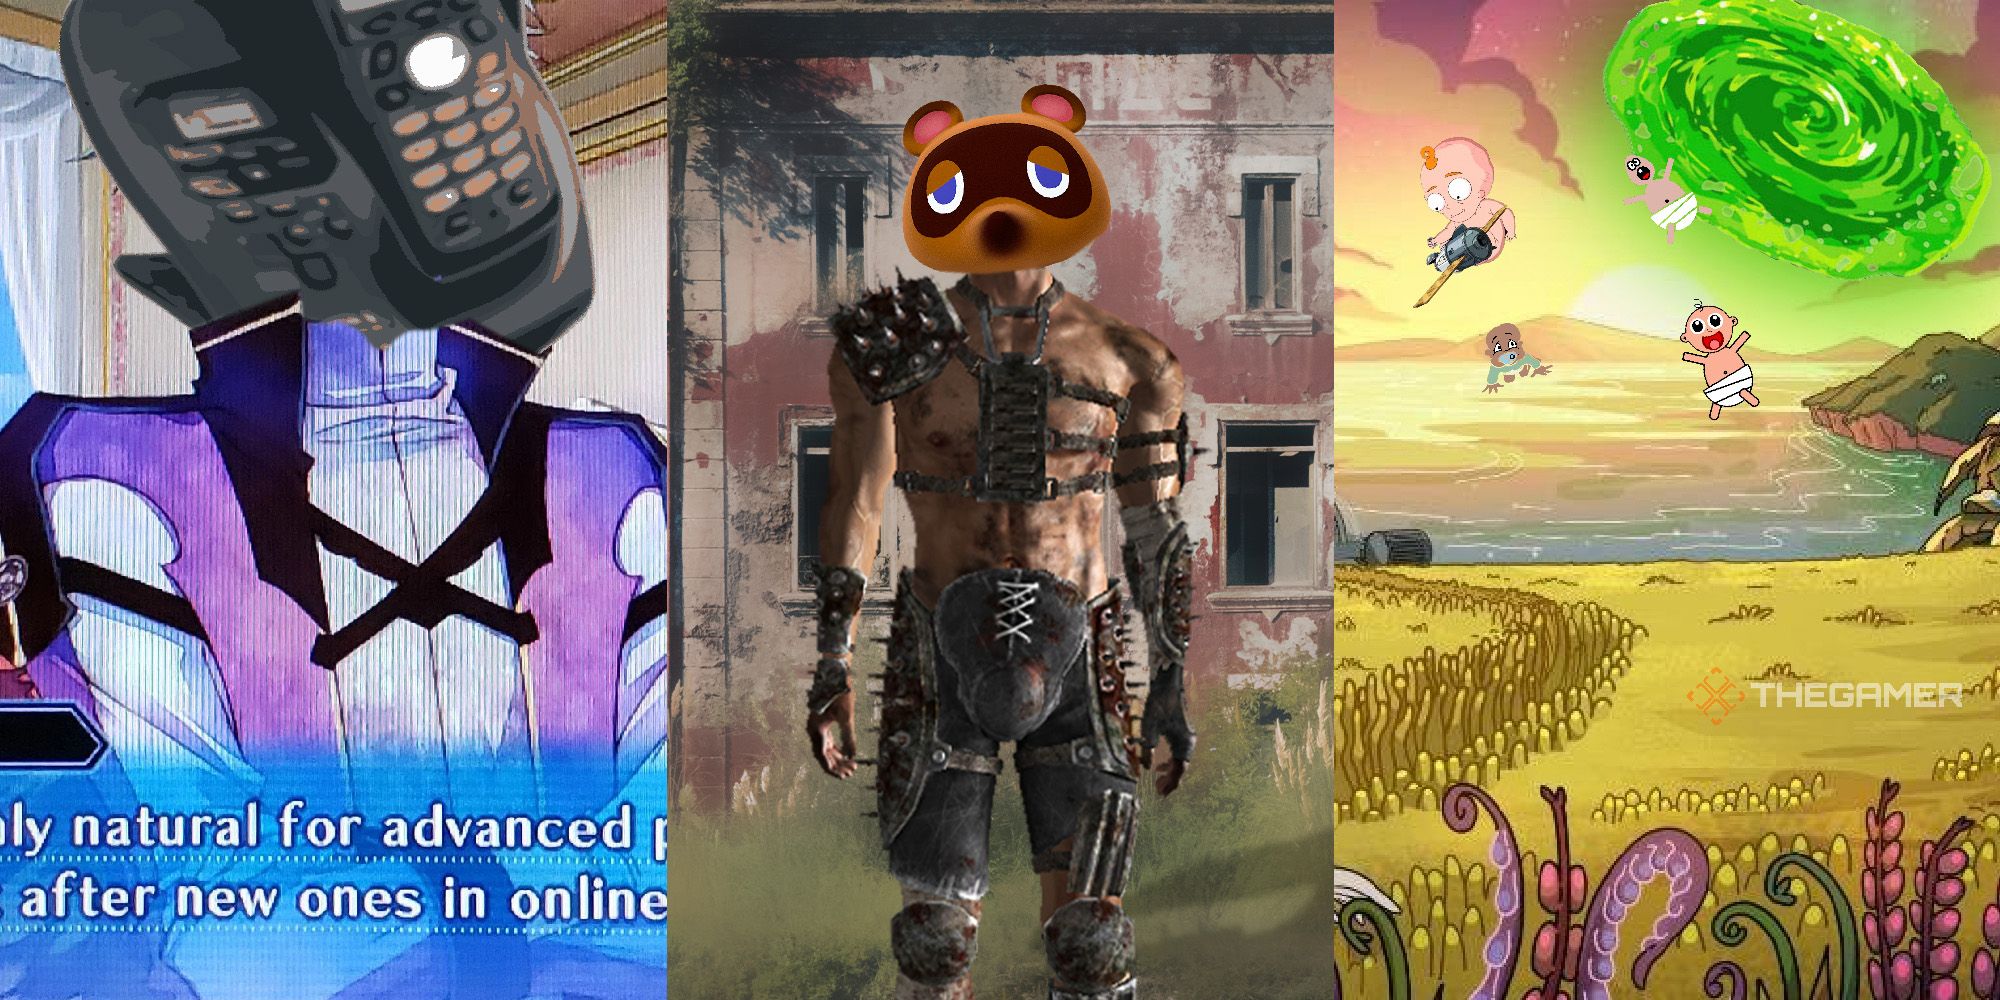 [Left Panel] A sentient answering machine flirts in a visual novel scene. [Middle Panel] Apocalyptic Tom Nook stands in front of a bomb shelter. [Right Panel] Babies rain from the sky onto a field of grass.